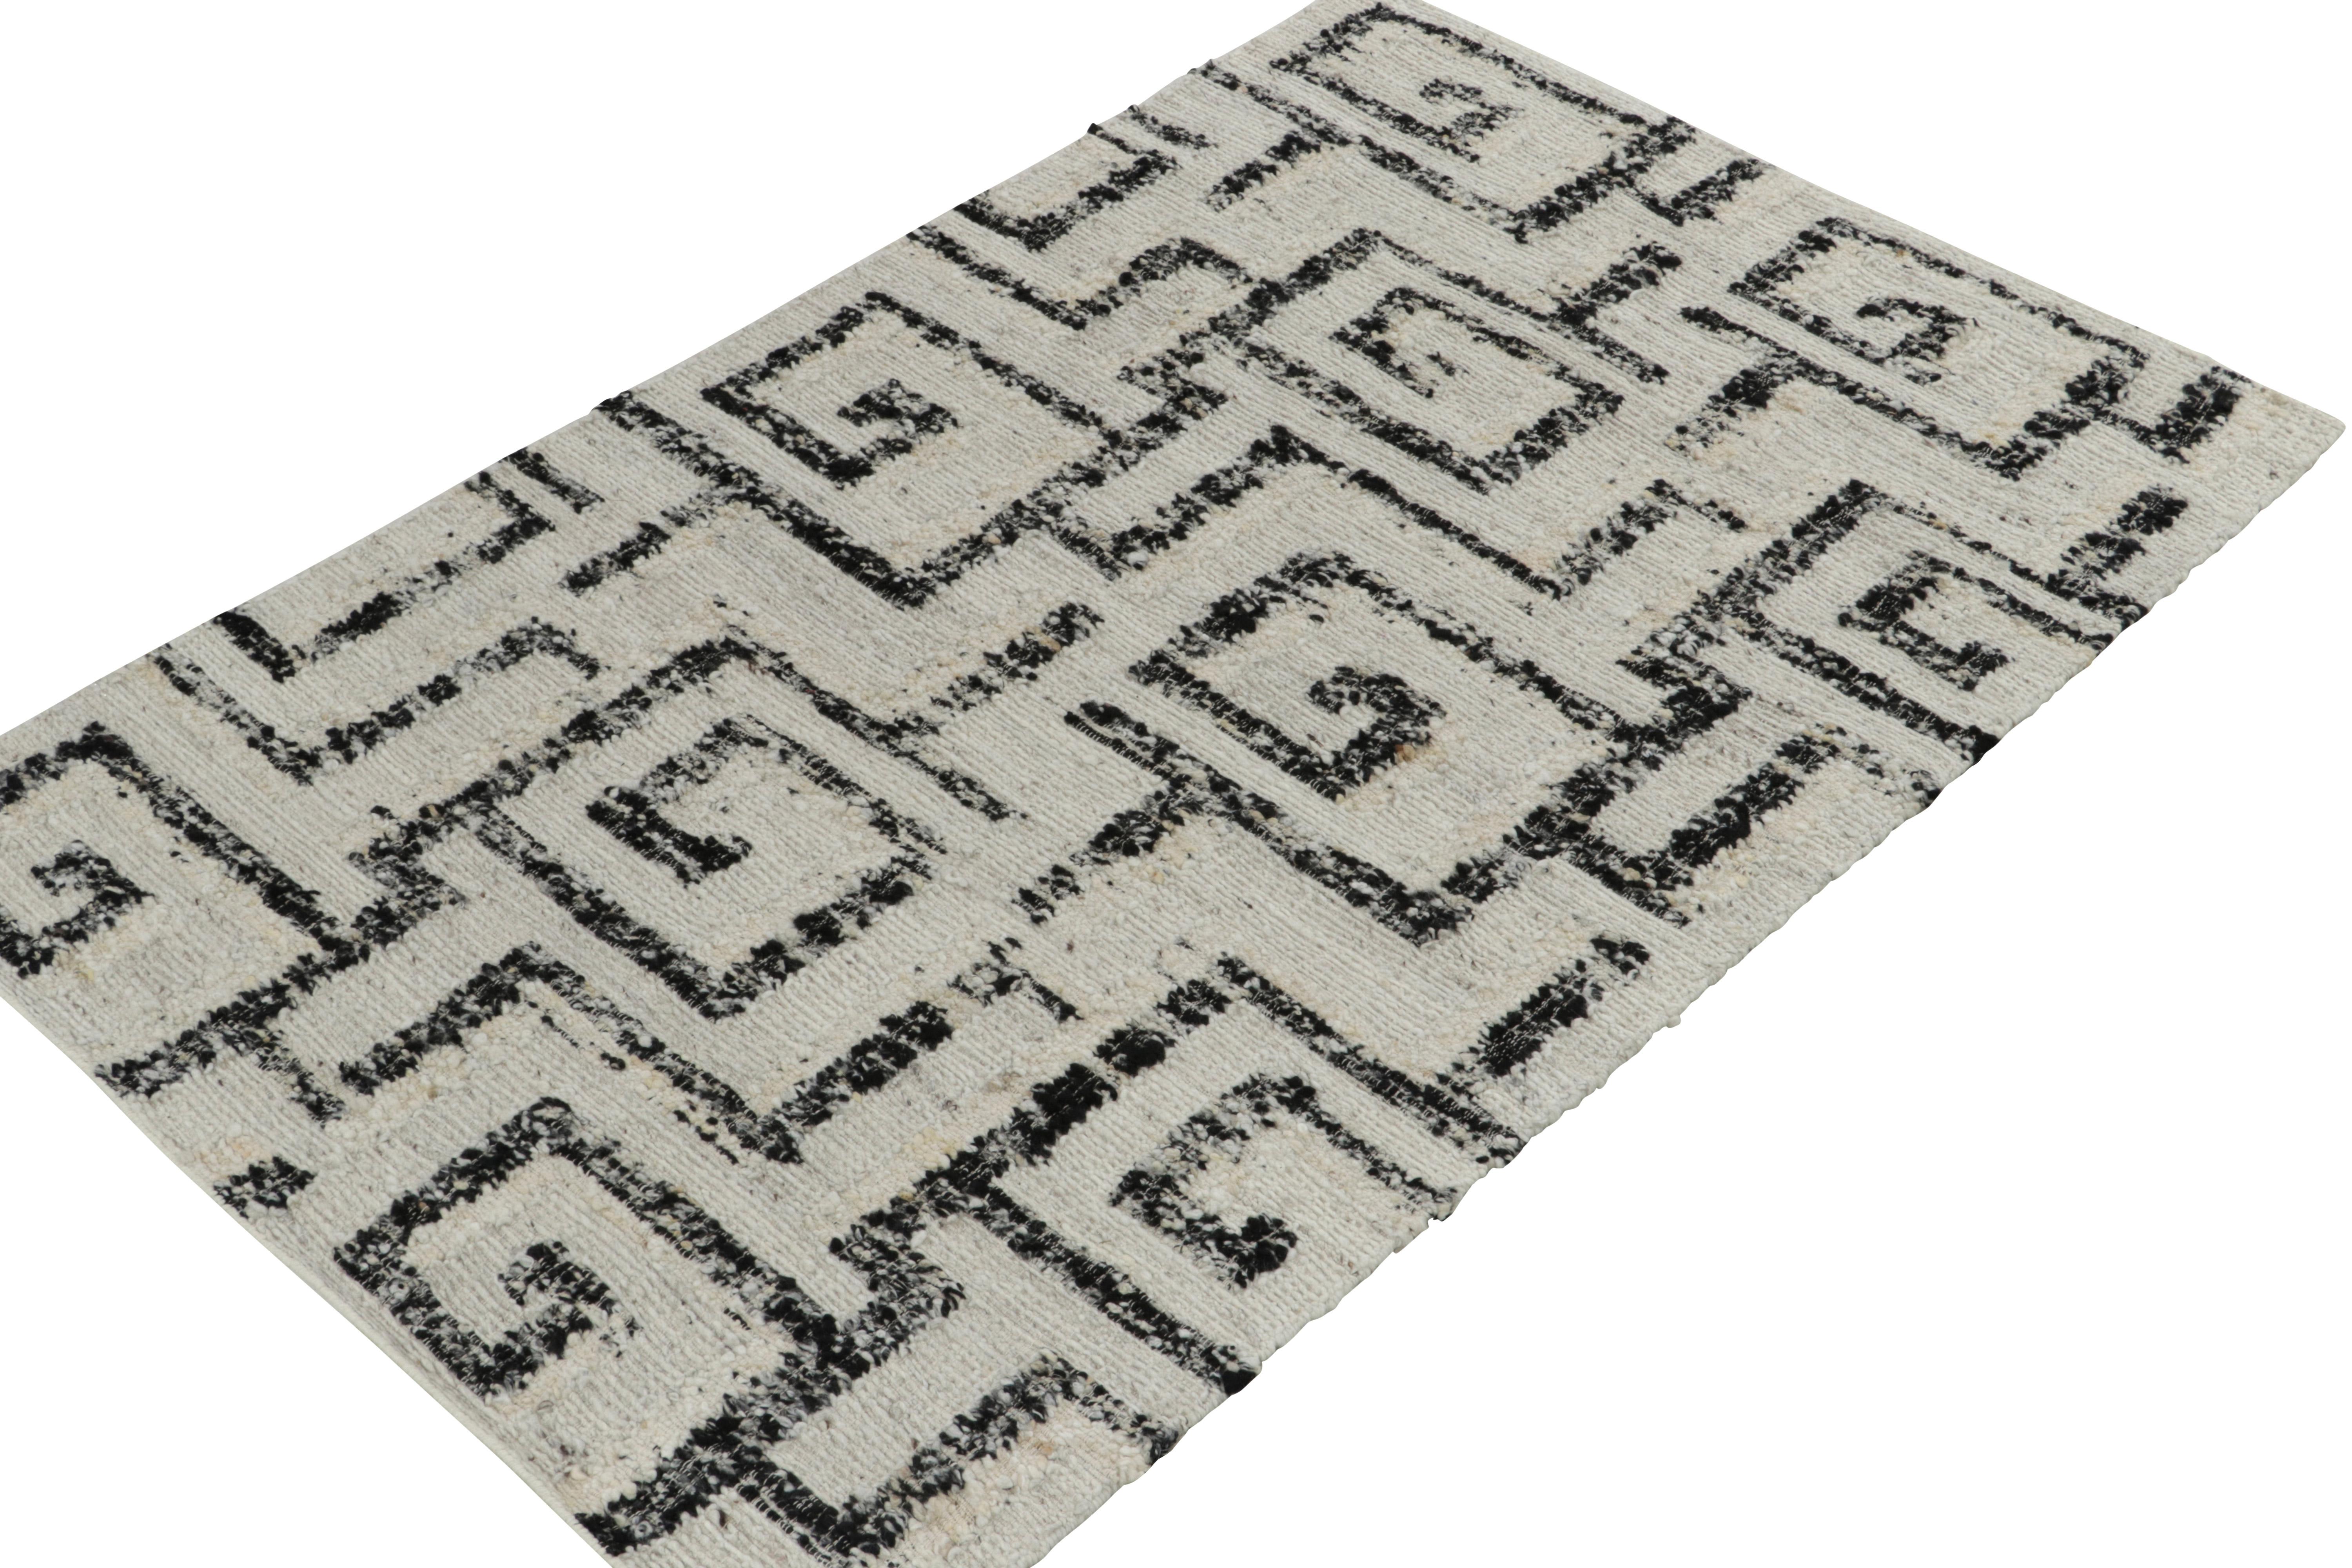 Art Deco Rug & Kilim's Contemporary Kilim Rug in Ivory, Charcoal Black Deco Pattern For Sale